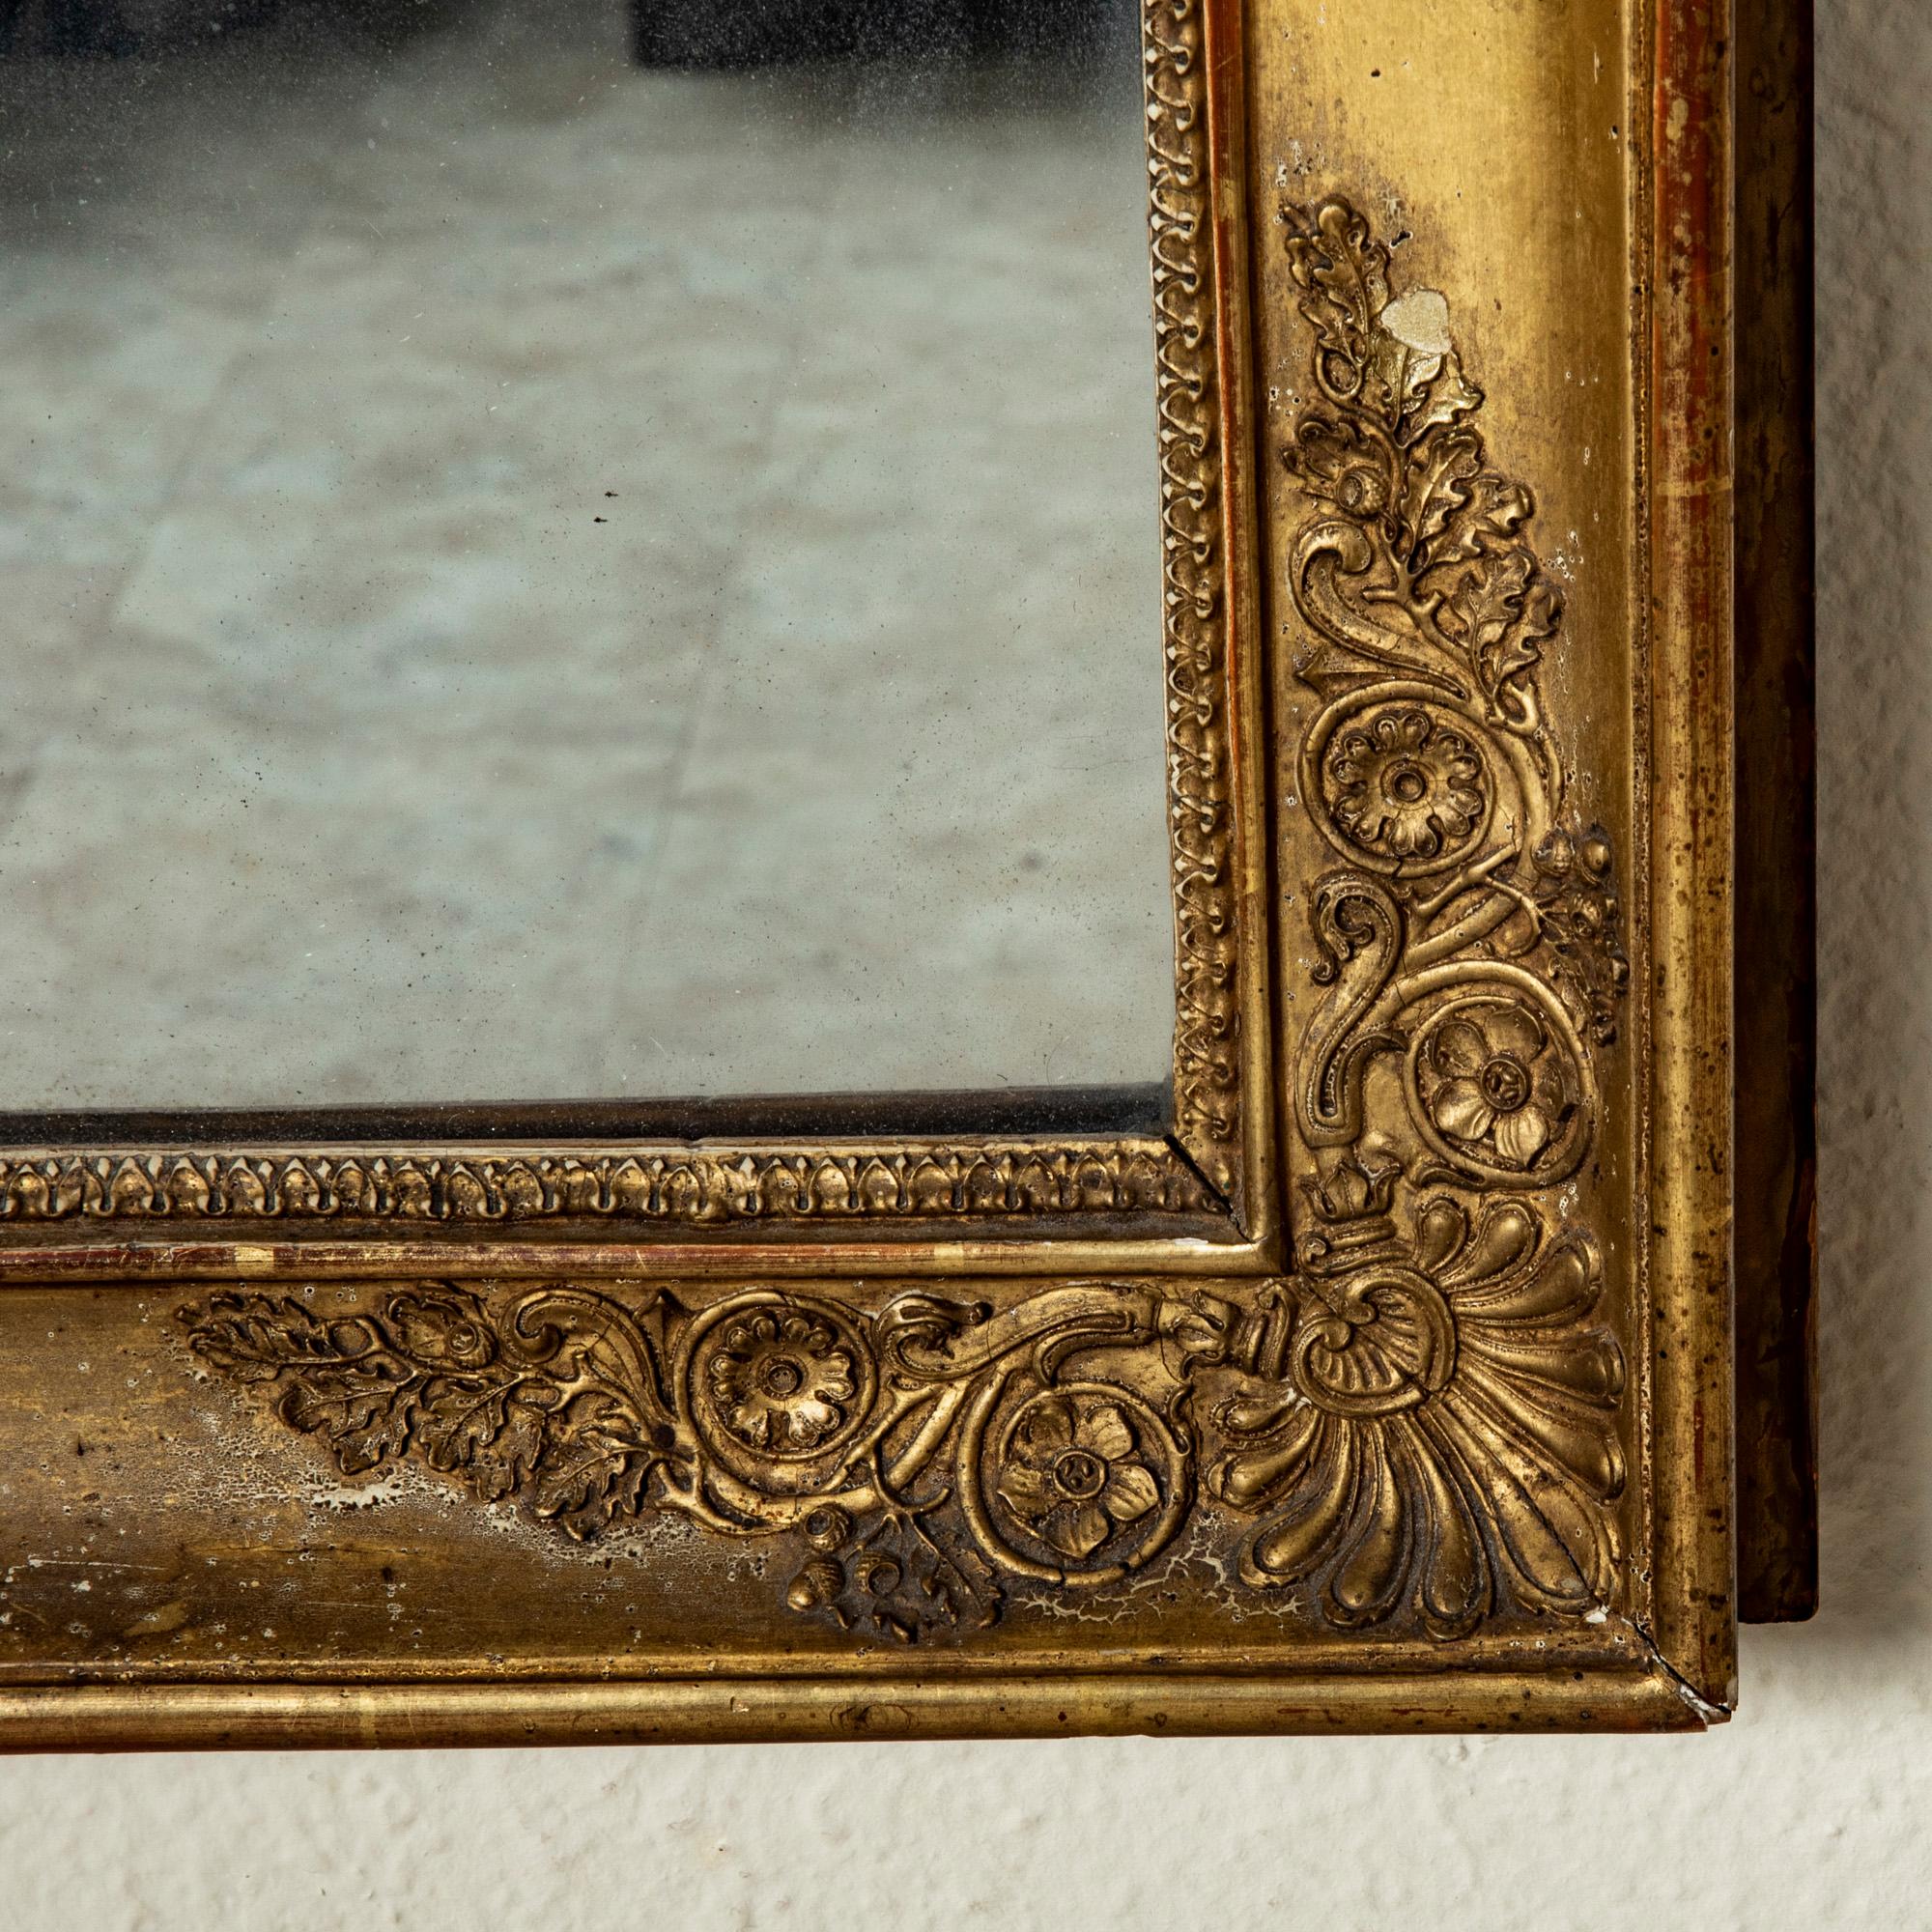 Narrow Early 19th Century French Restauration Period Giltwood Mirror For Sale 6